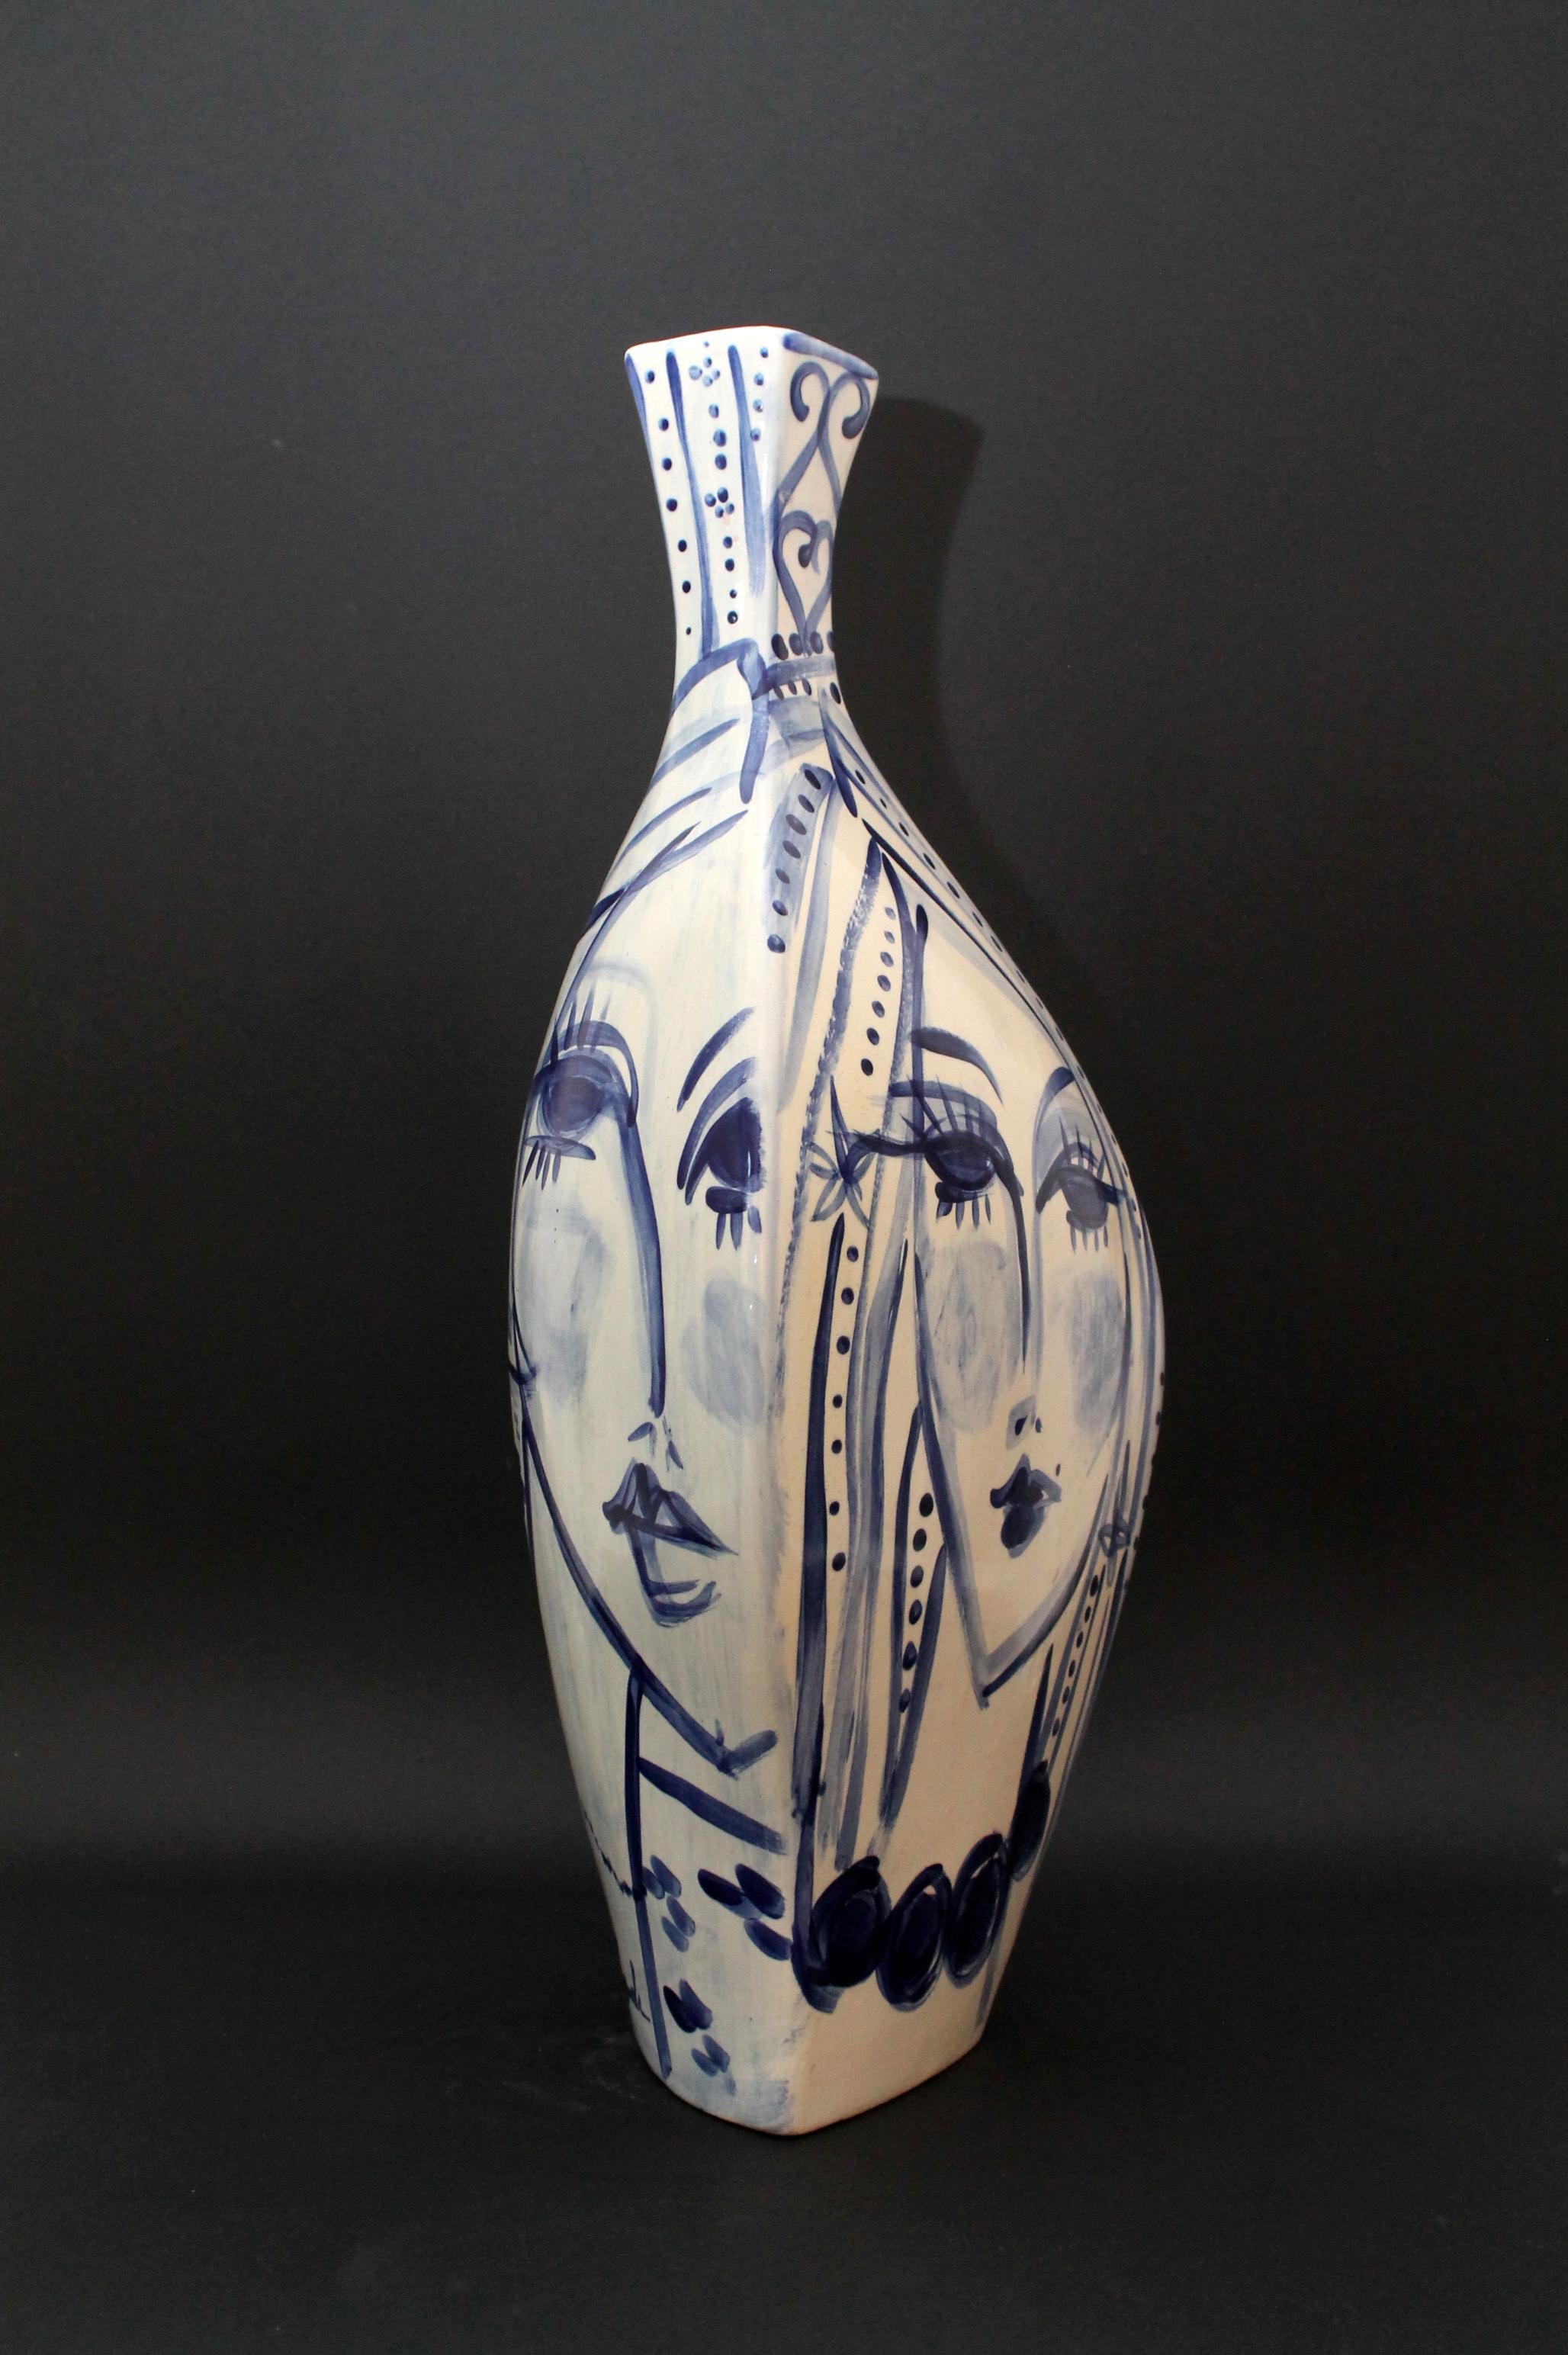 Contemporary Cris Conde )) Amorphous (hand crafted/painted) signed ceramic vase (55x23x21cm) For Sale